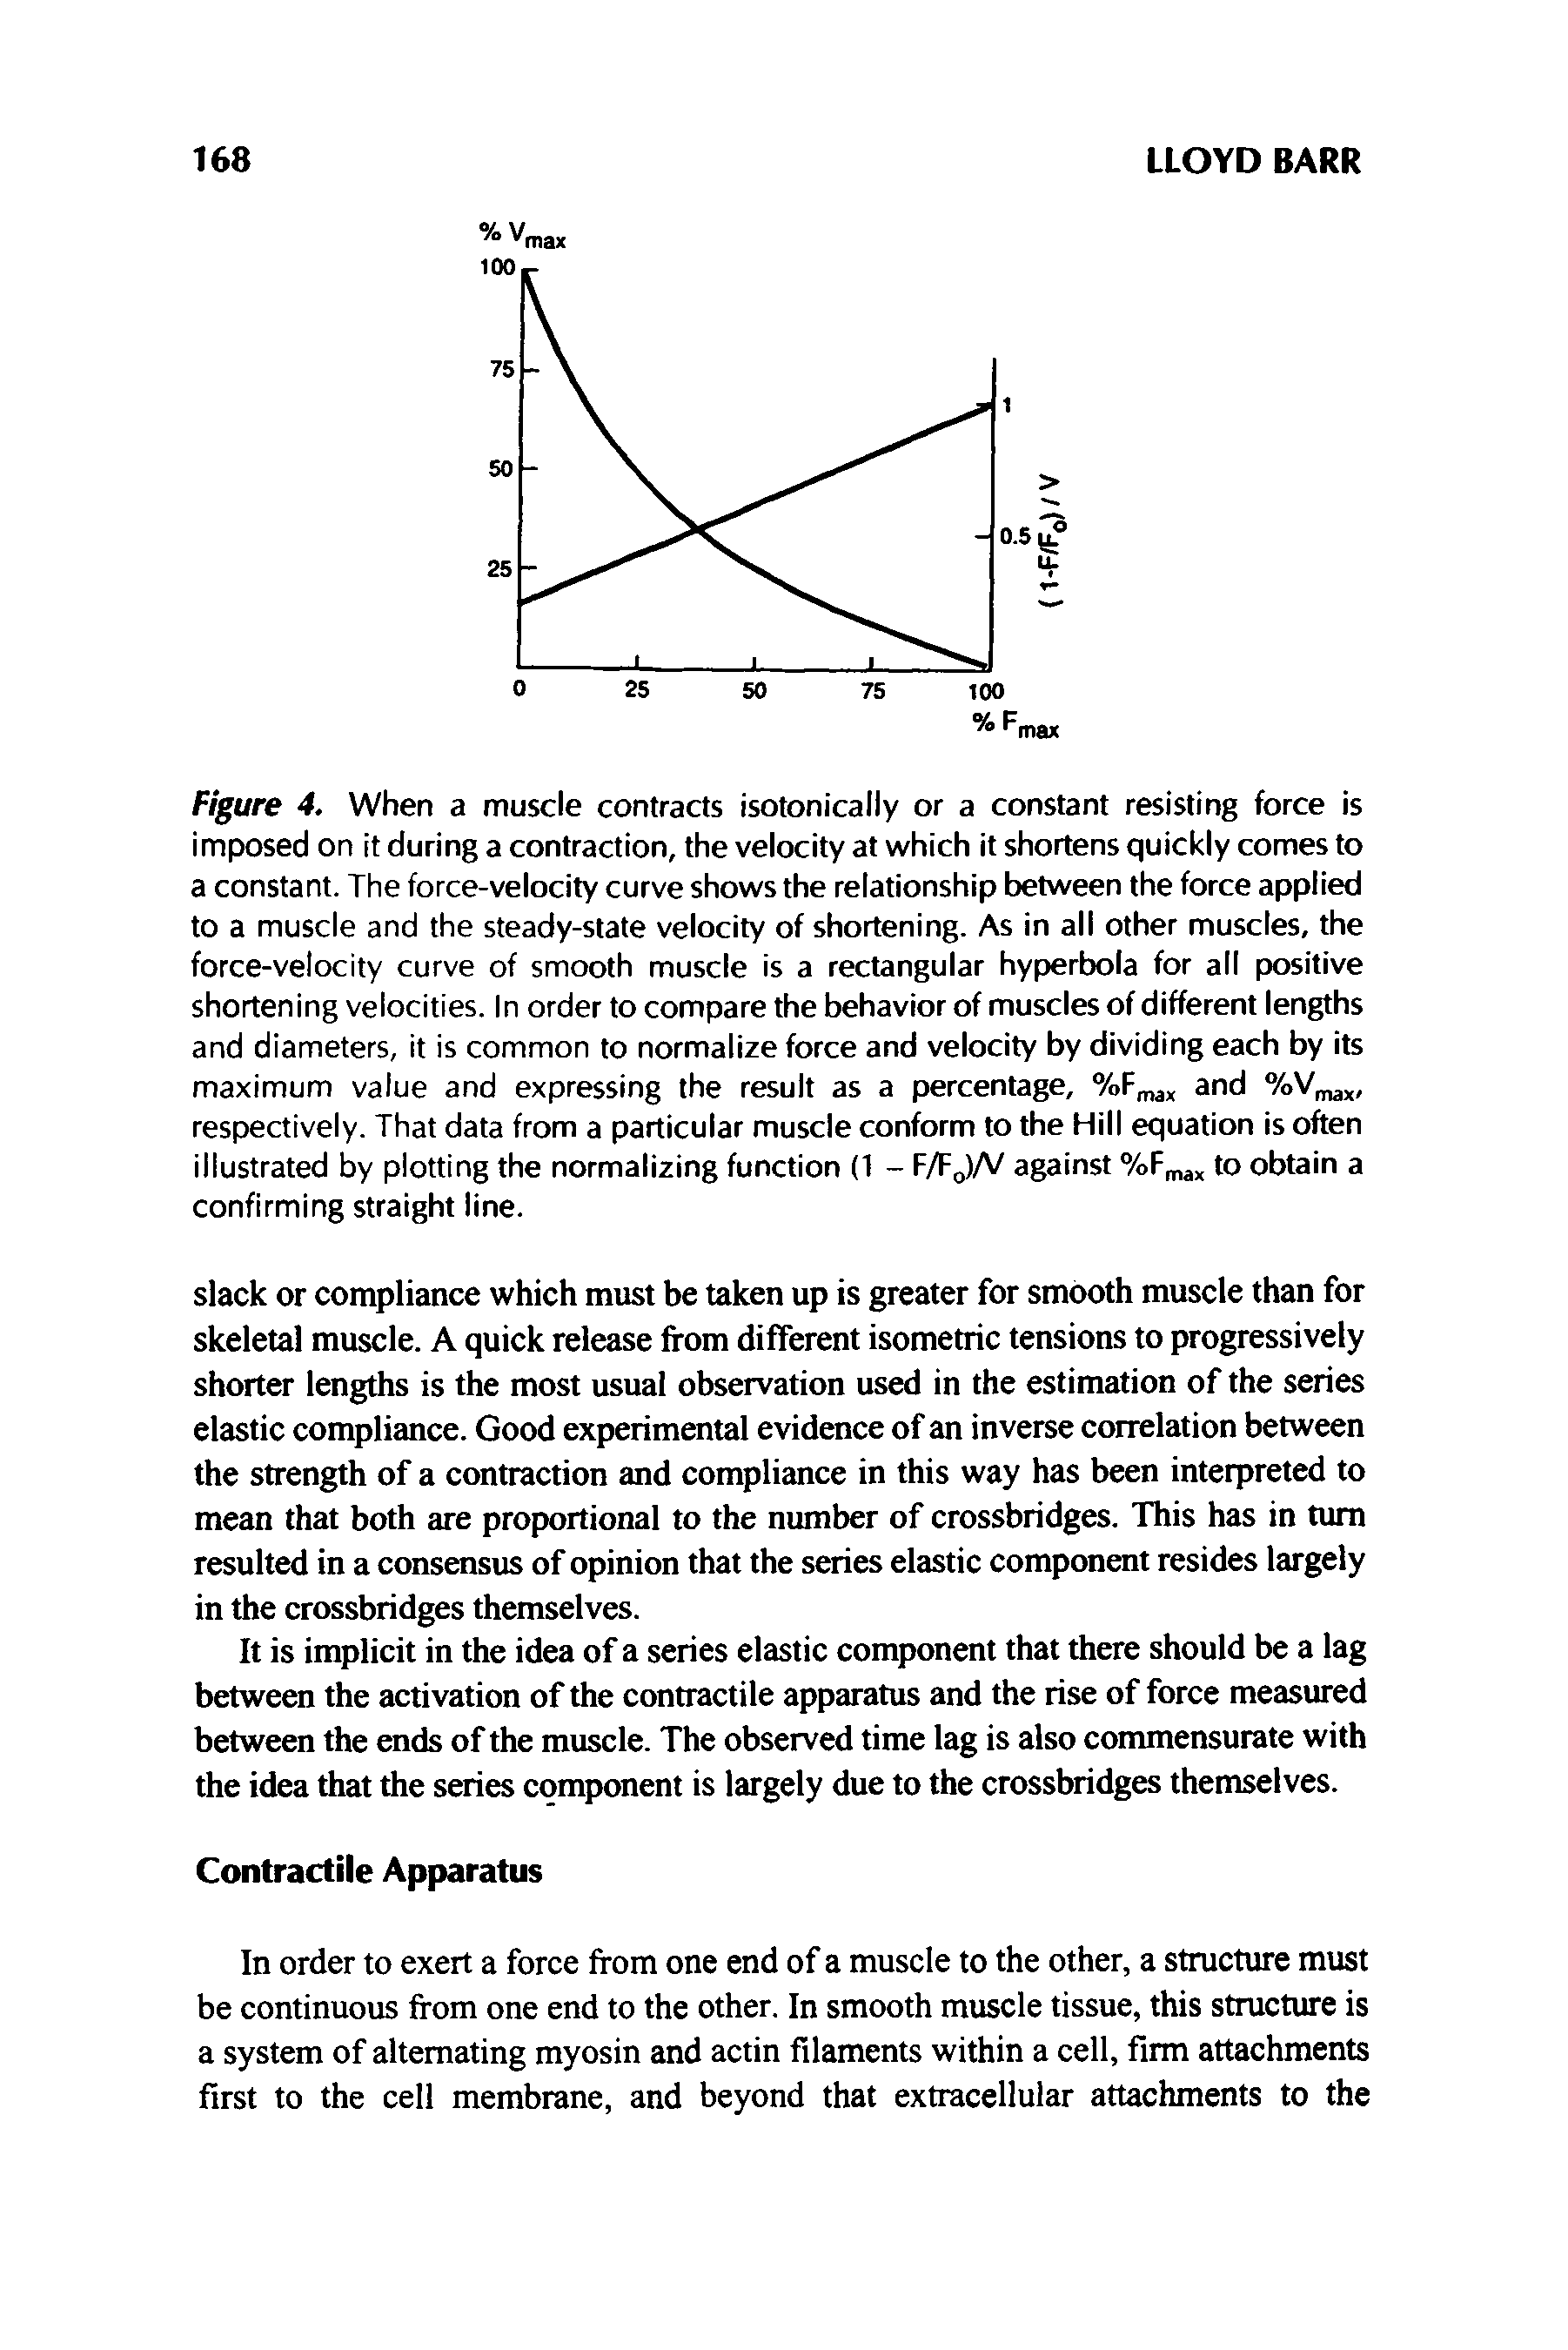 Figure 4. When a muscle contracts isotonically or a constant resisting force is imposed on it during a contraction, the velocity at which it shortens quickly comes to a constant. The force-velocity curve shows the relationship between the force applied to a muscle and the steady-state velocity of shortening. As in all other muscles, the force-velocity curve of smooth muscle is a rectangular hyperbola for all positive shortening velocities. In order to compare the behavior of muscles of different lengths and diameters, it is common to normalize force and velocity by dividing each by its maximum value and expressing the result as a percentage, nd...